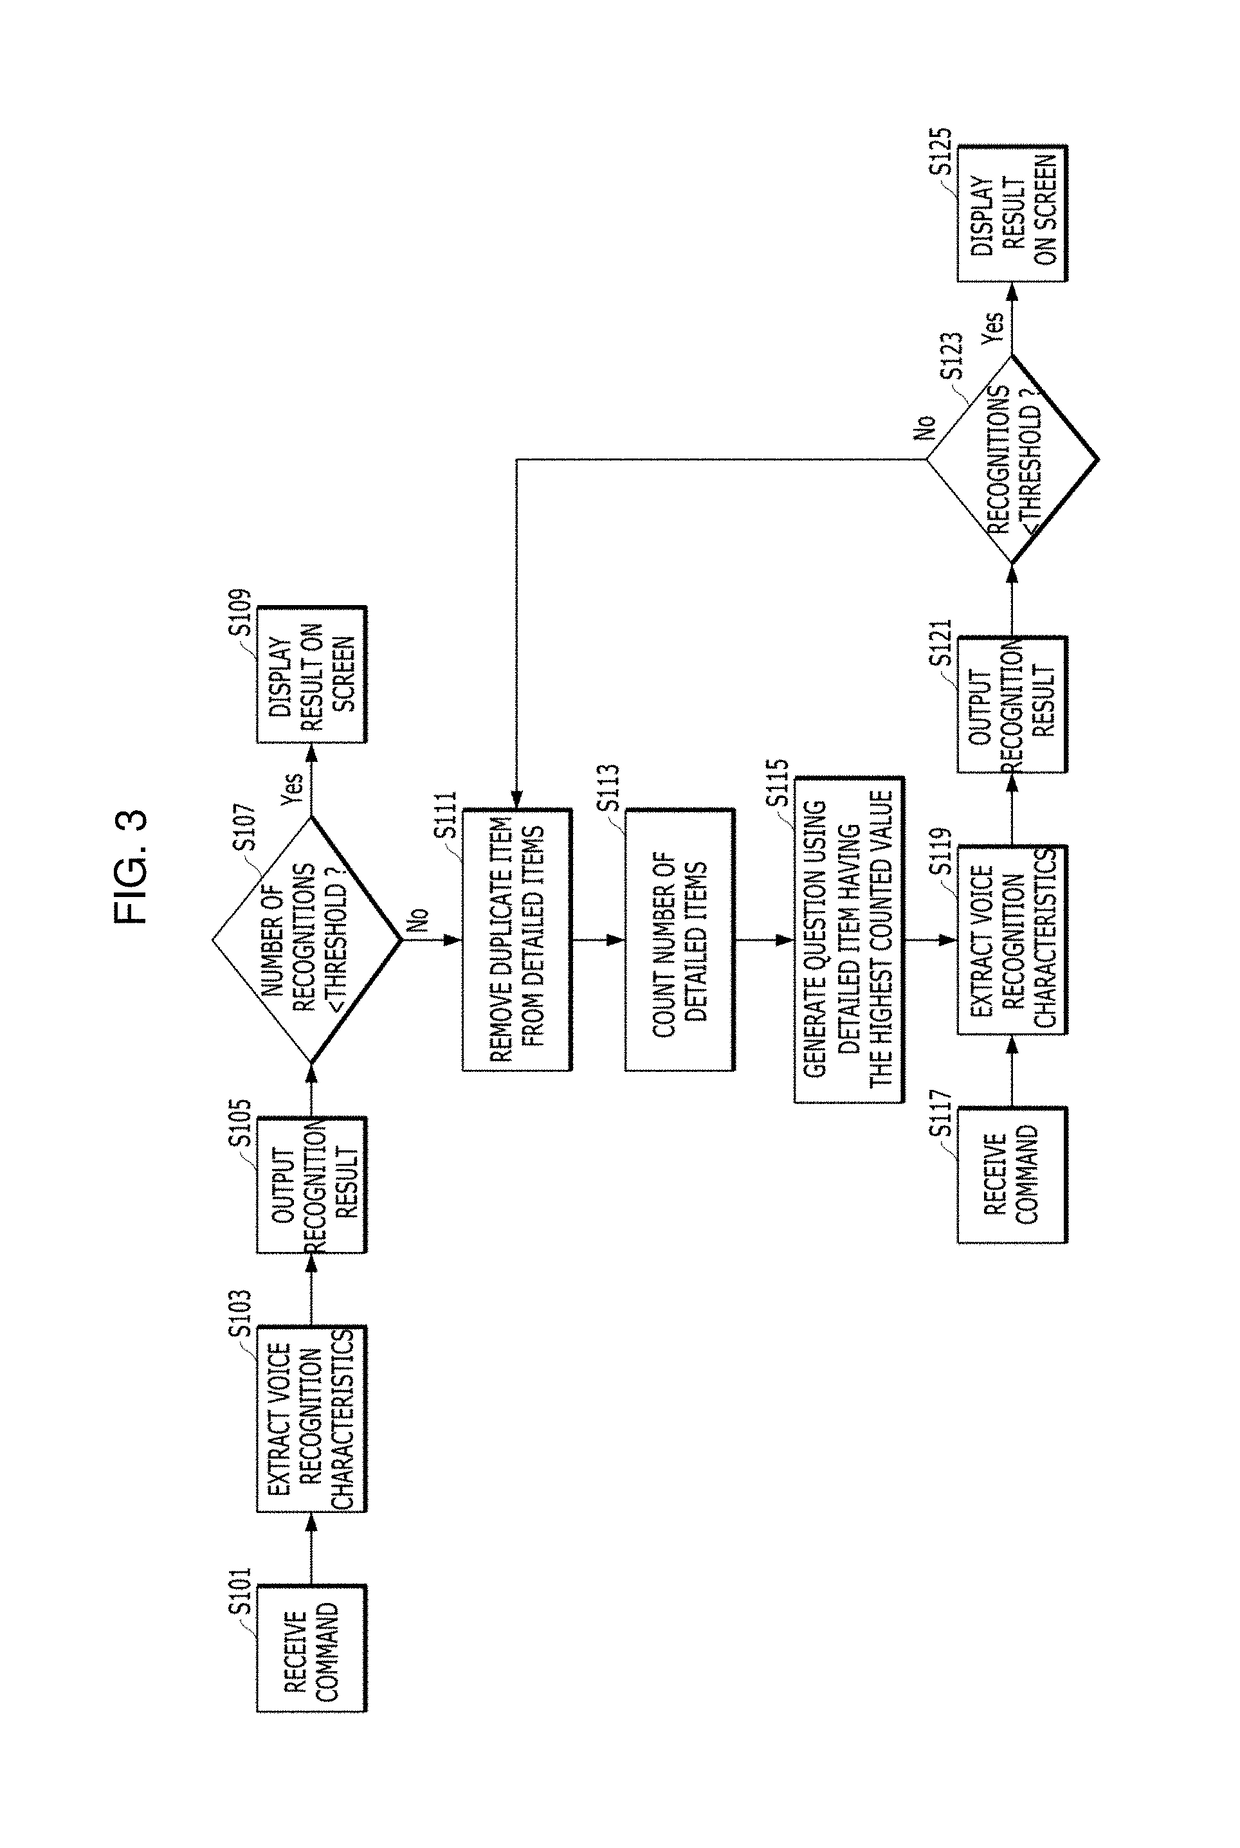 Method and apparatus for searching for geographic information using interactive voice recognition